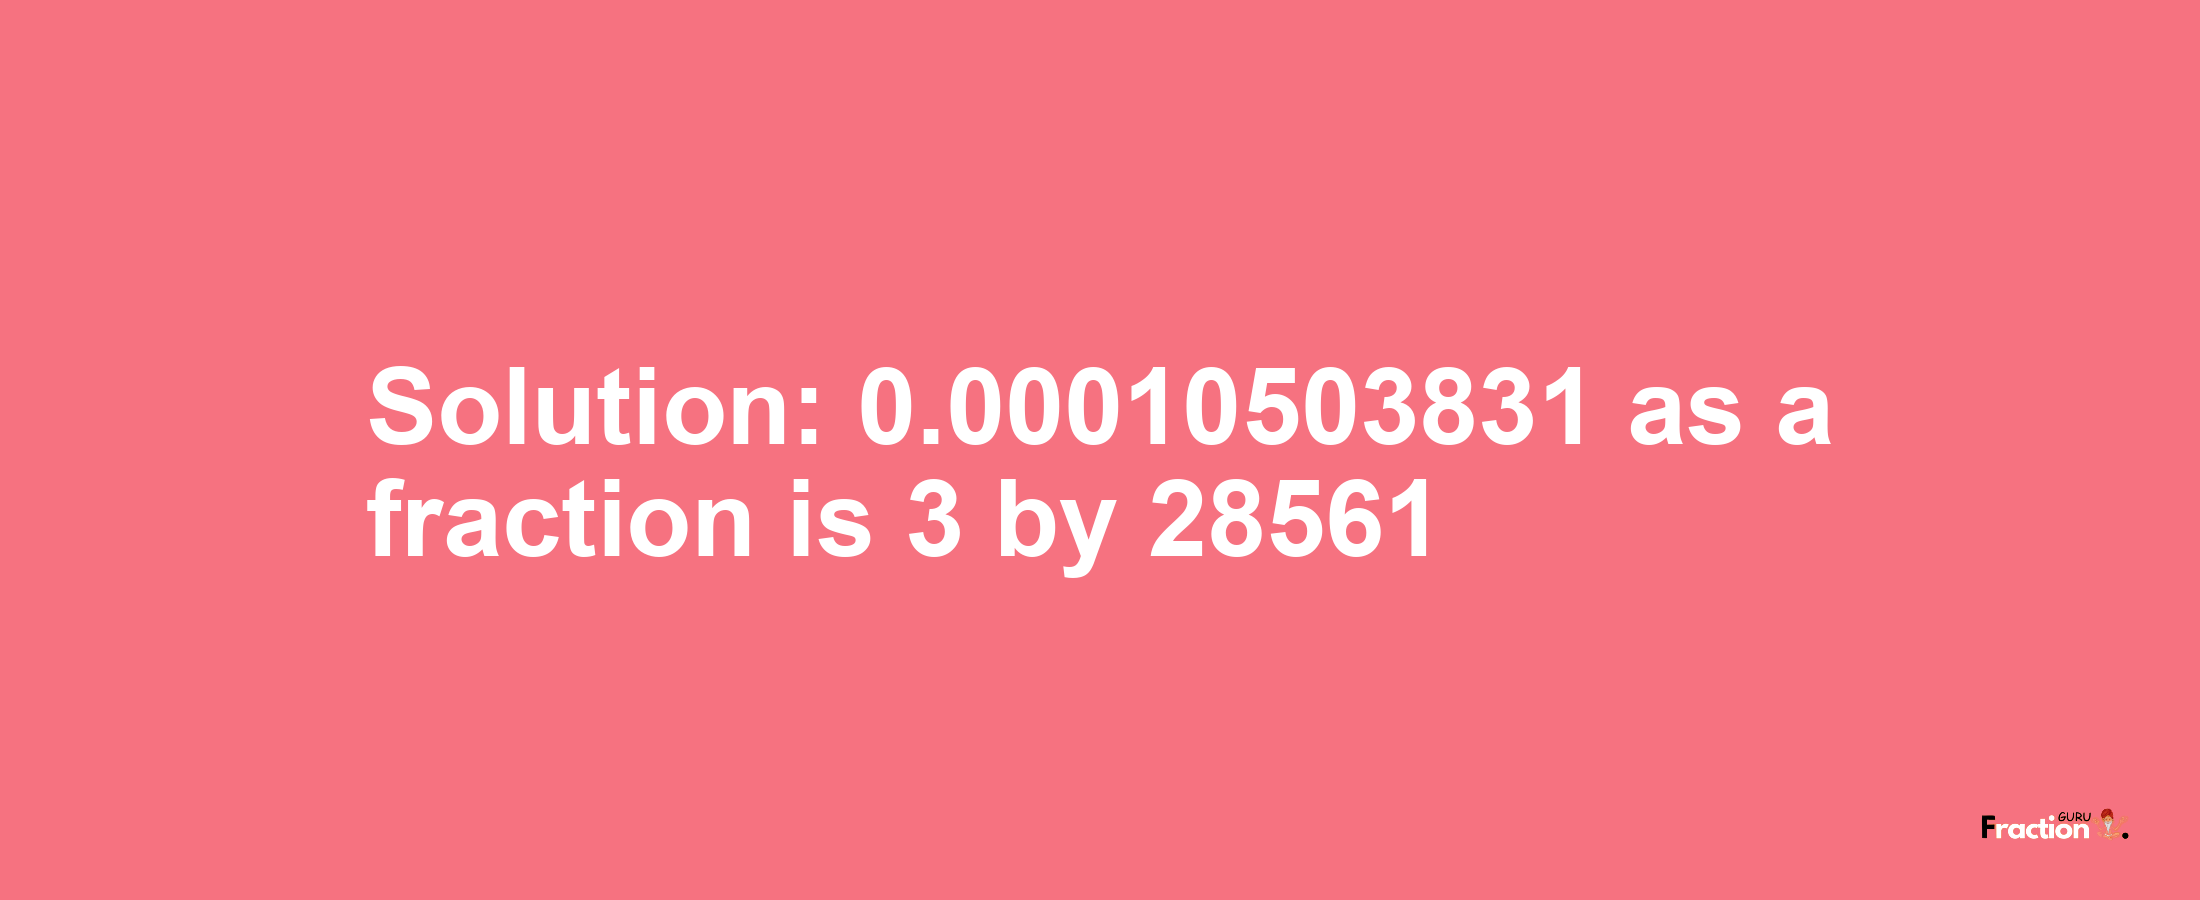 Solution:0.00010503831 as a fraction is 3/28561